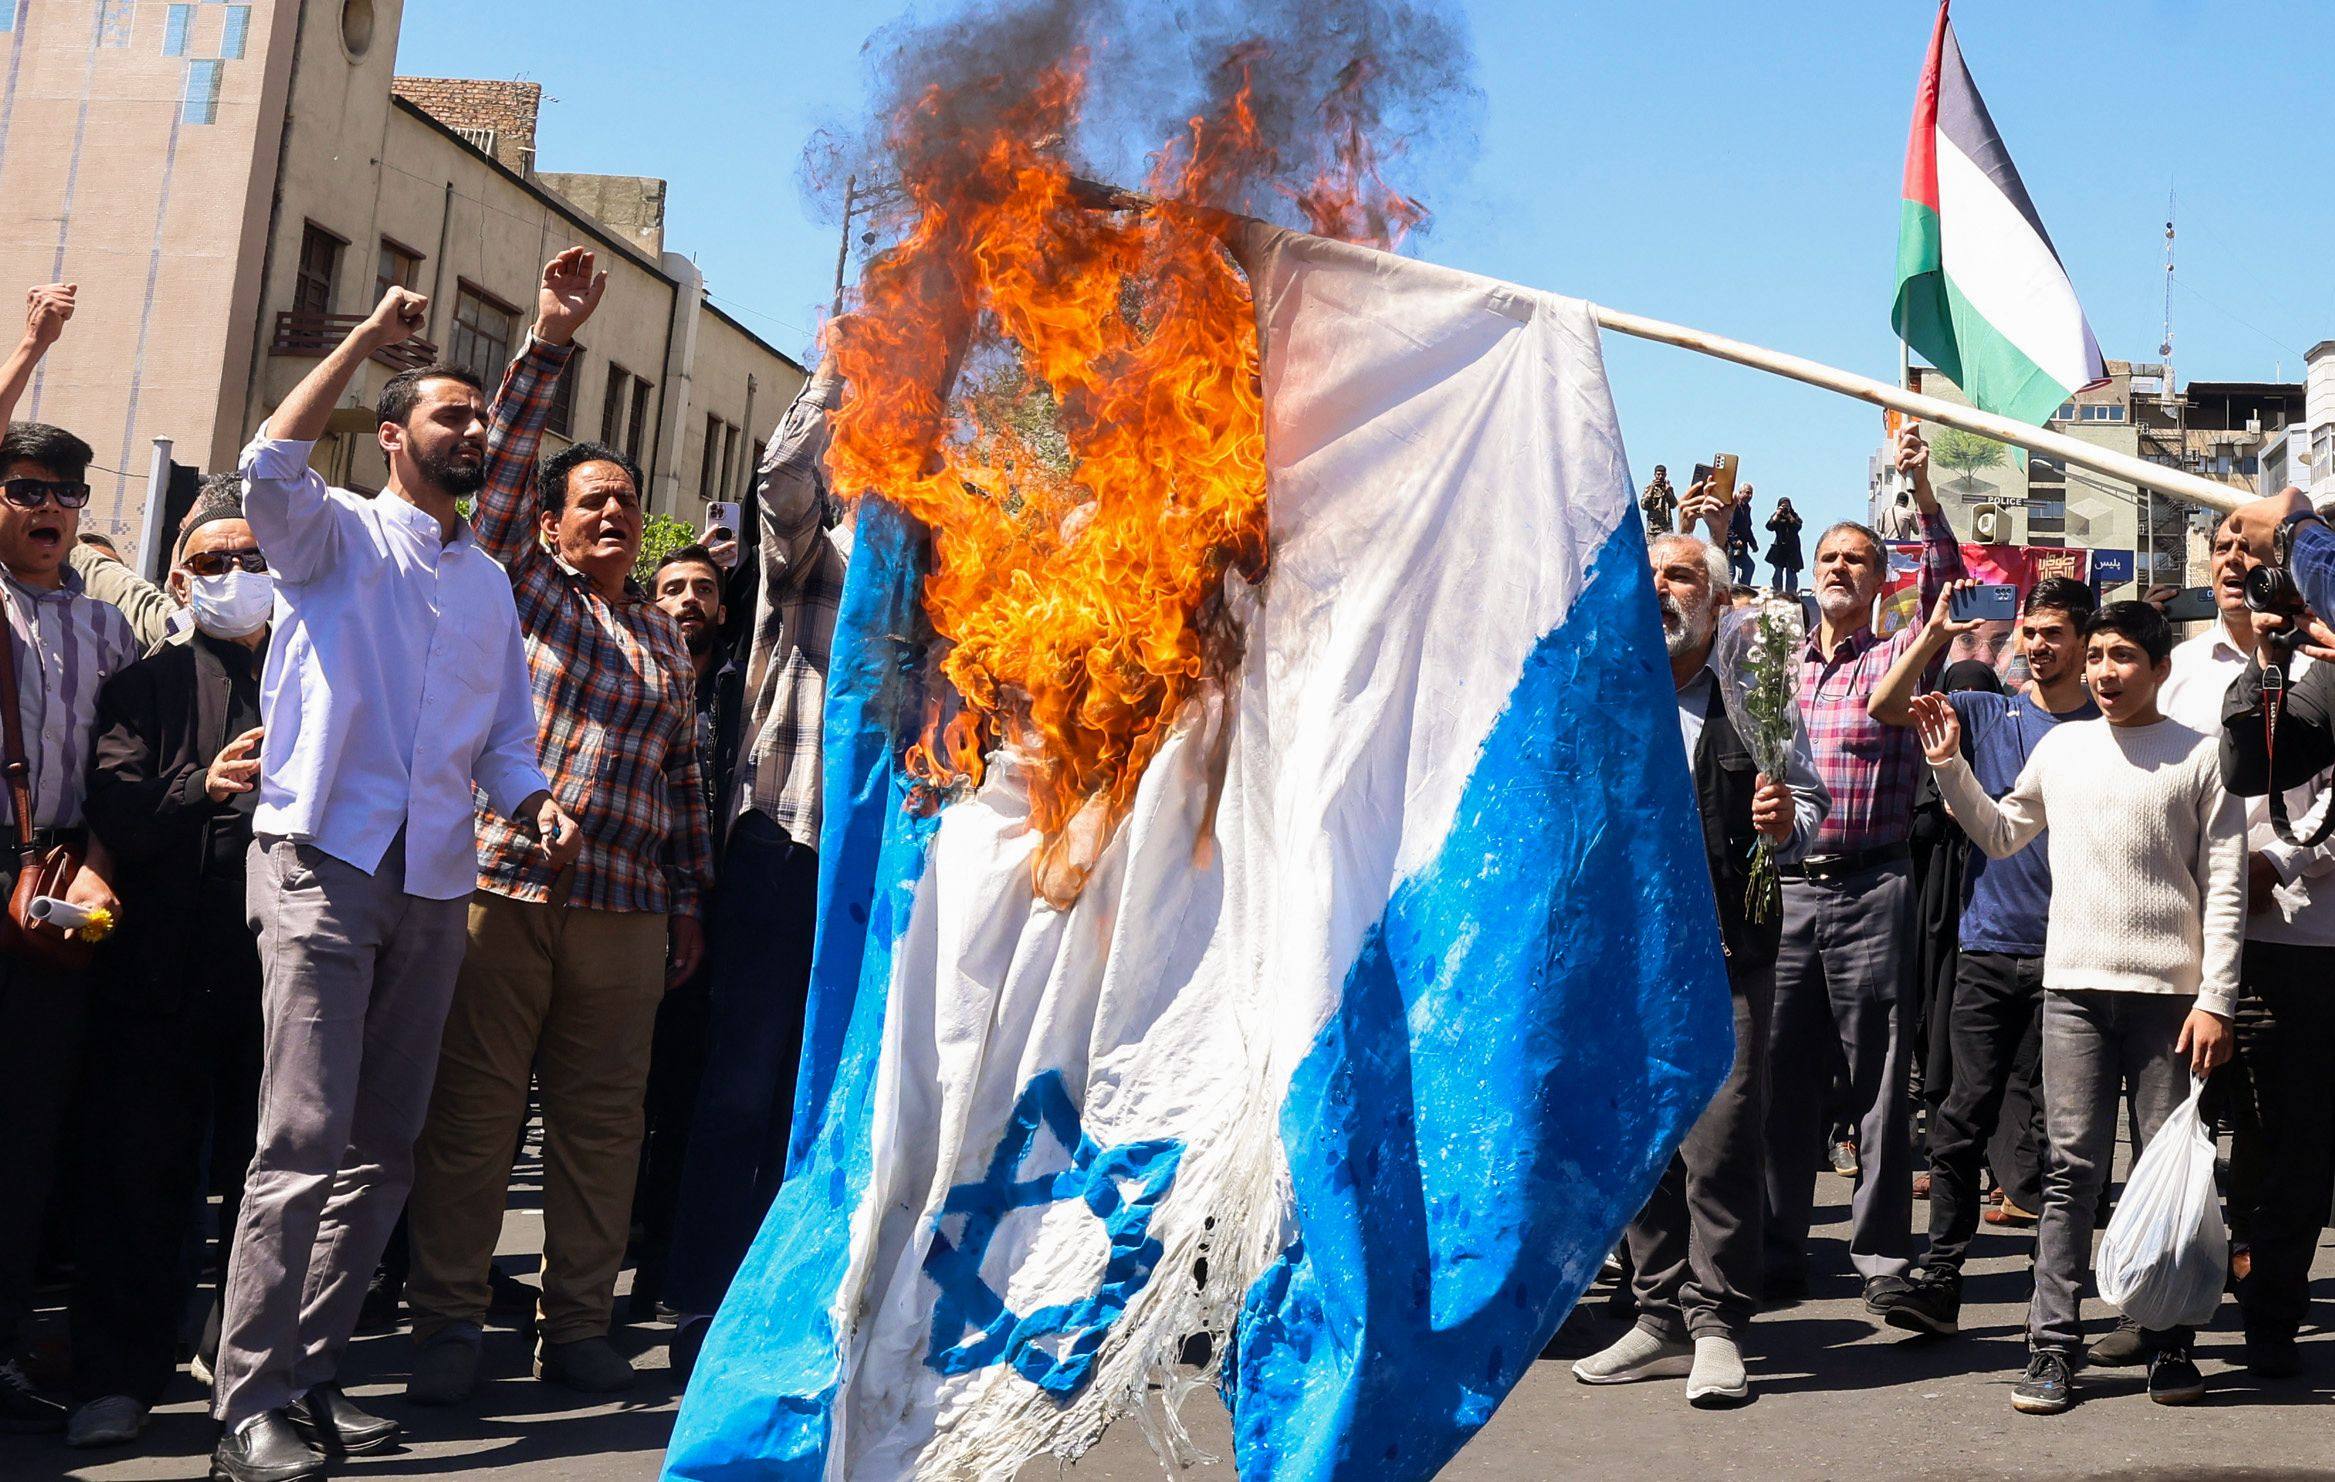 An Israeli flag being burnt during the funeral for seven Islamic Revolutionary Guard Corps members killed in a strike in Syria, which Iran blamed on Israel, in Tehran on April 5. Photo: AFP